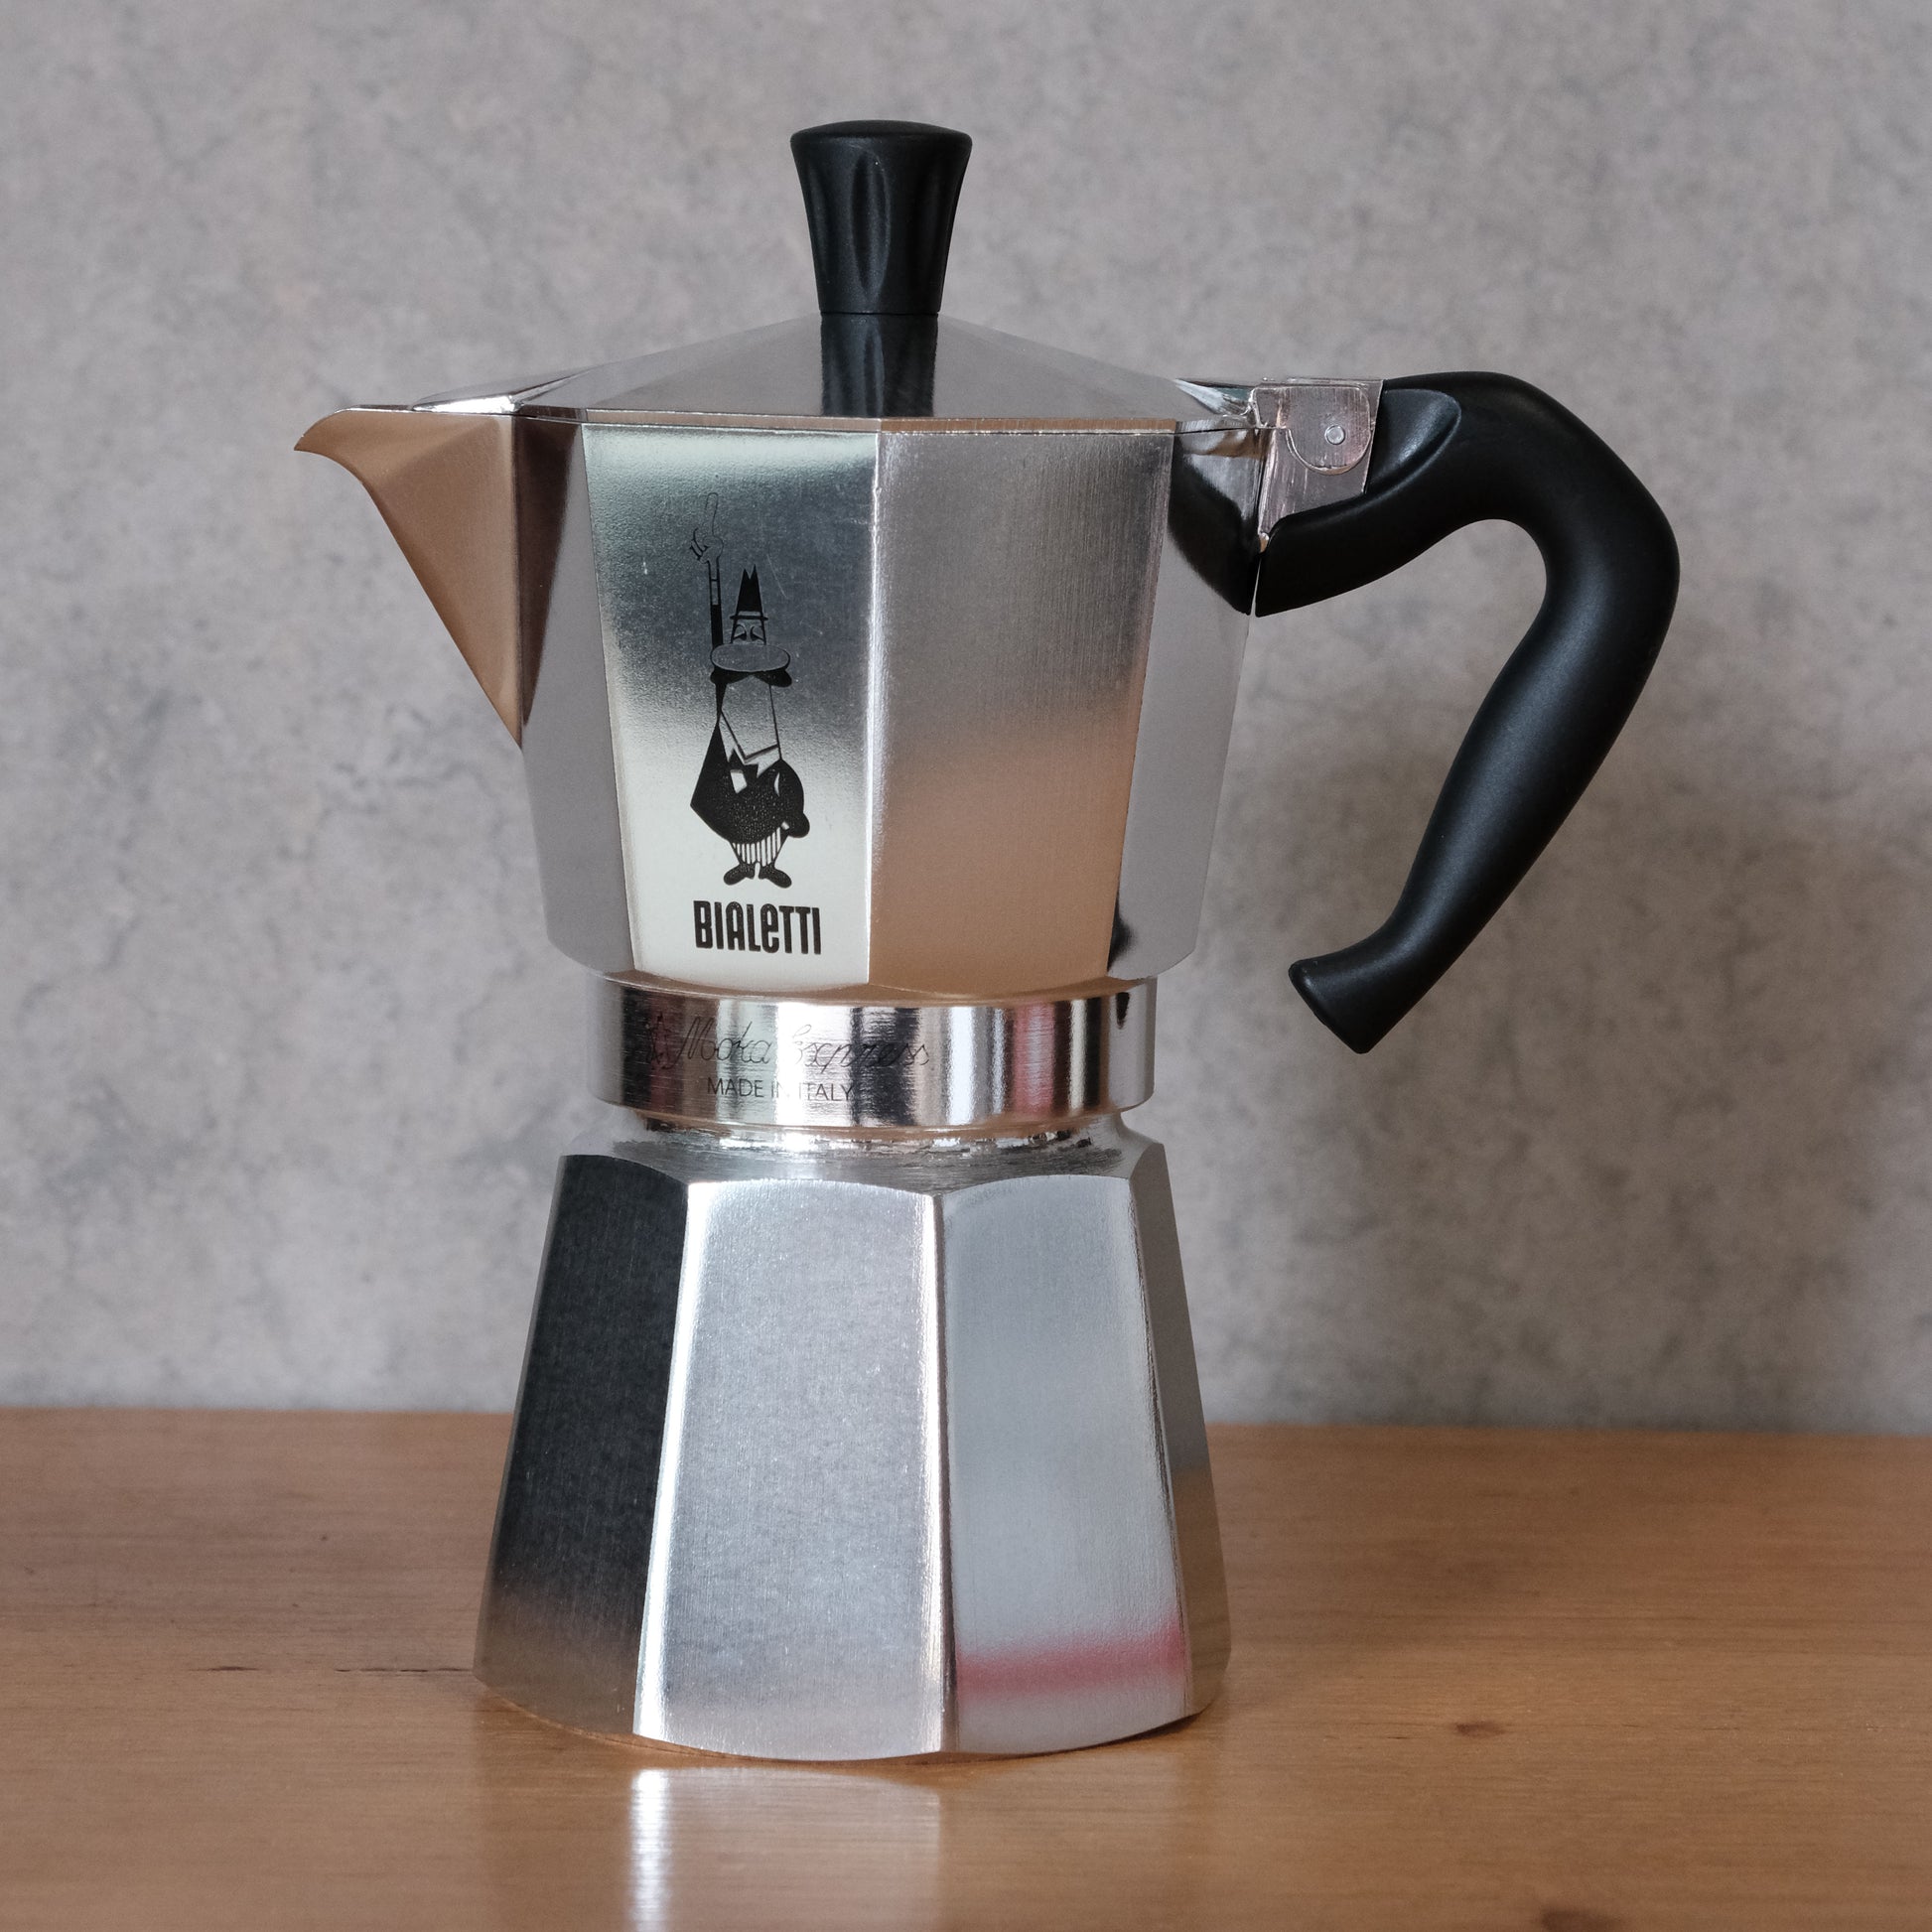 Coffee Maker Review: Bialetti Moka Express 6 Cup 